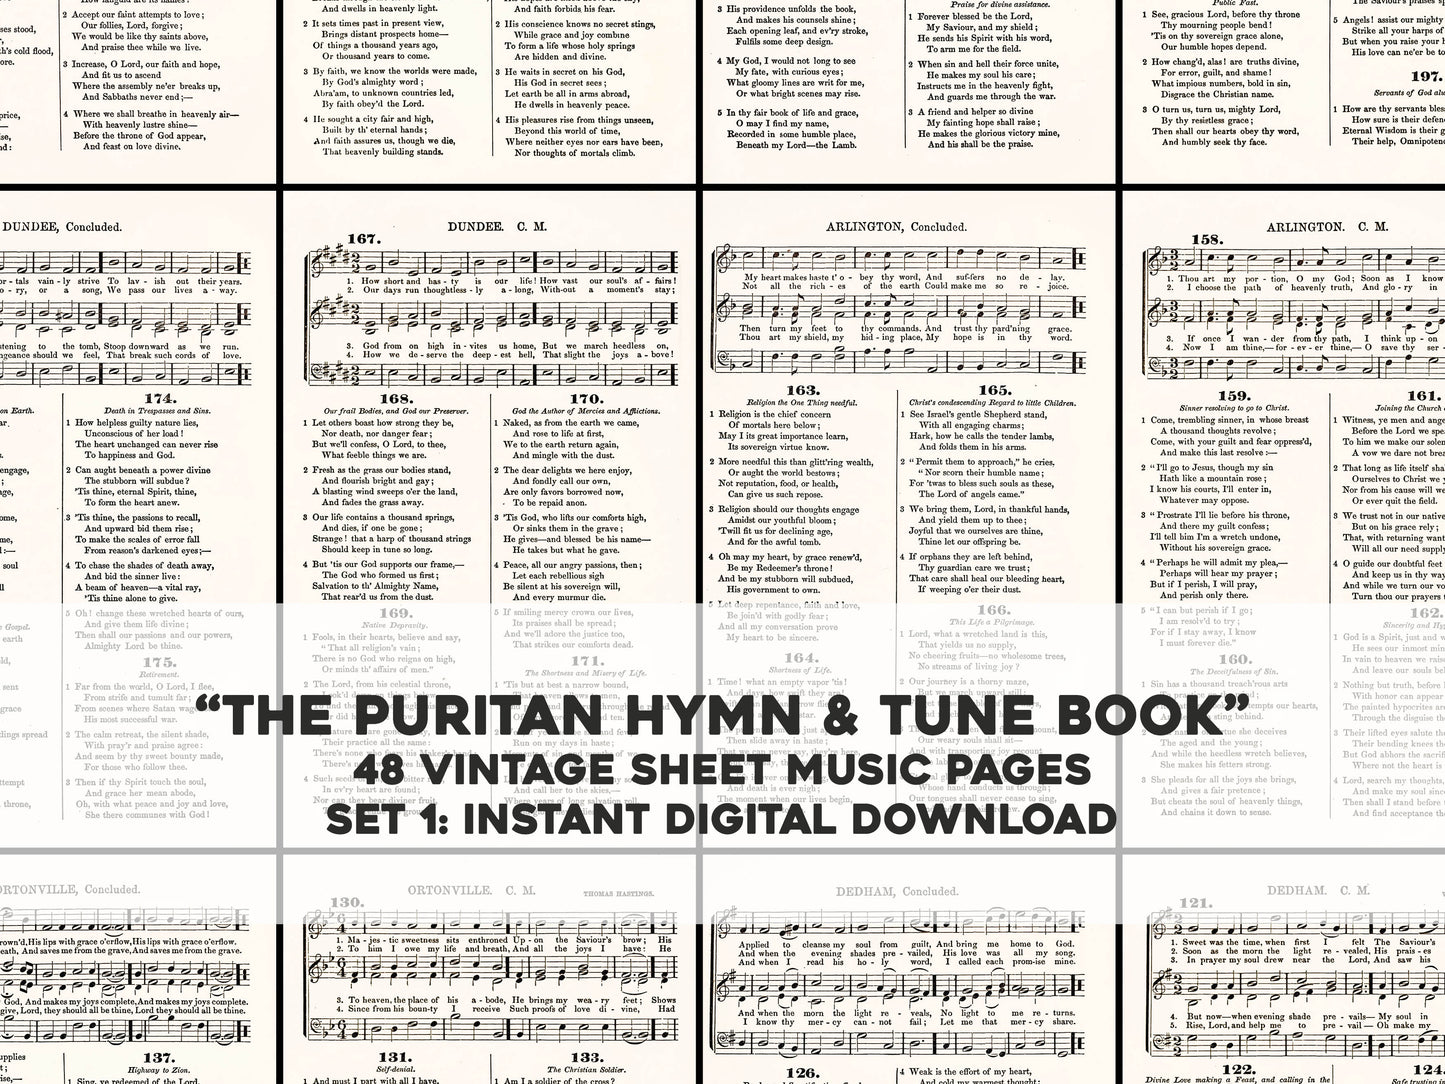 The Puritan Hymn and Tune Book Set 1 [48 Images]